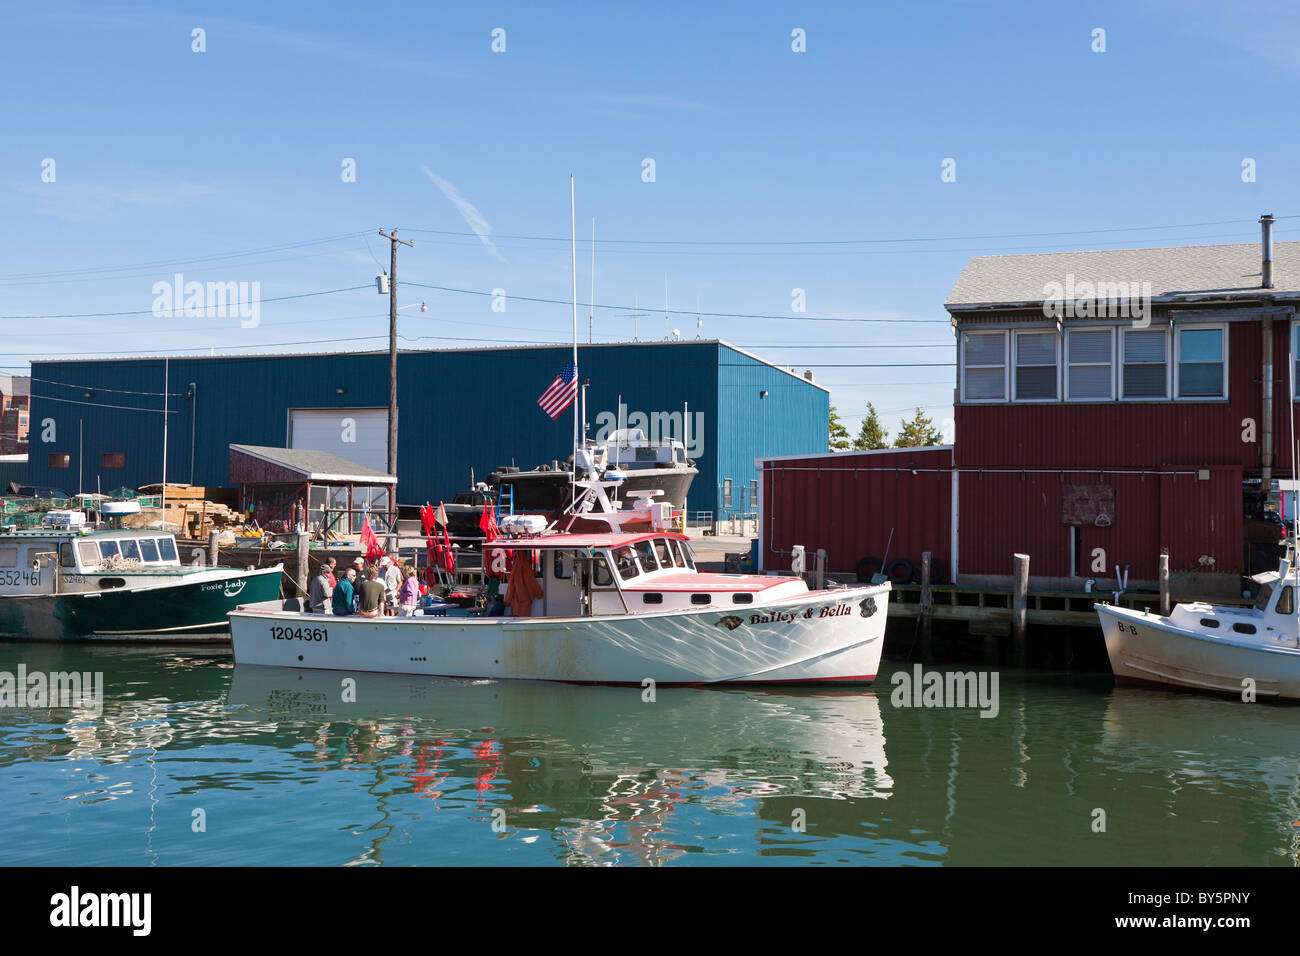 Tourists on commercial charter lobster boat Bailey & Bella in Portland, Maine Stock Photo